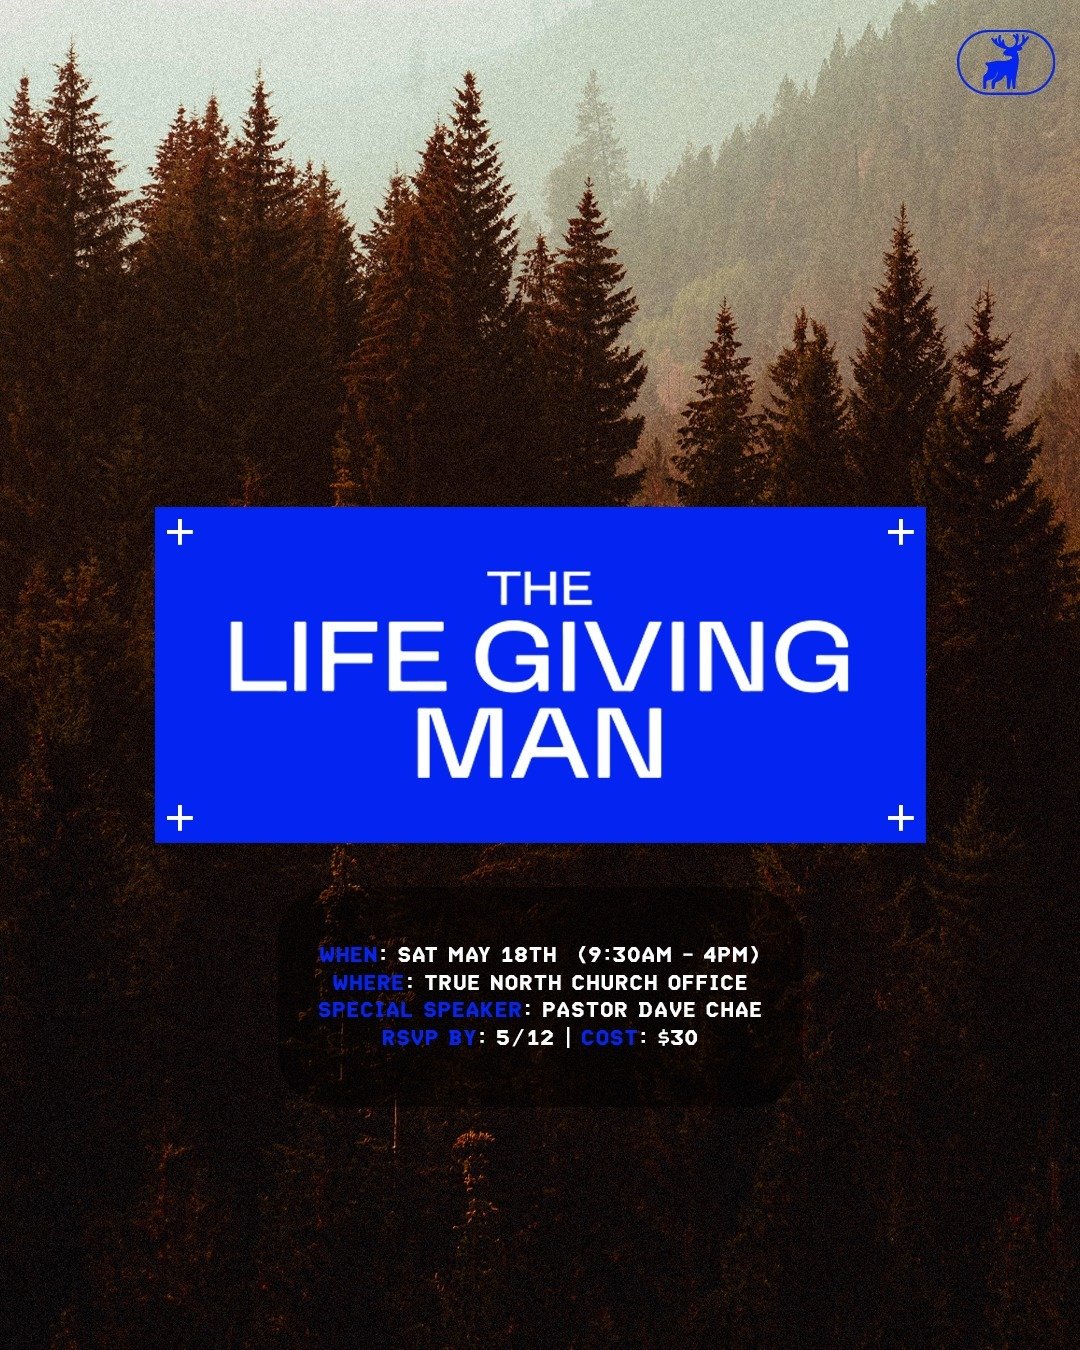 Hey church! Announcements below:

- Join our Men's Ministry for a workshop titled &quot;The Life Giving Man&quot;. This workshop takes a deep dive into understanding what it takes for today's man to build the type of unshakable foundation required to